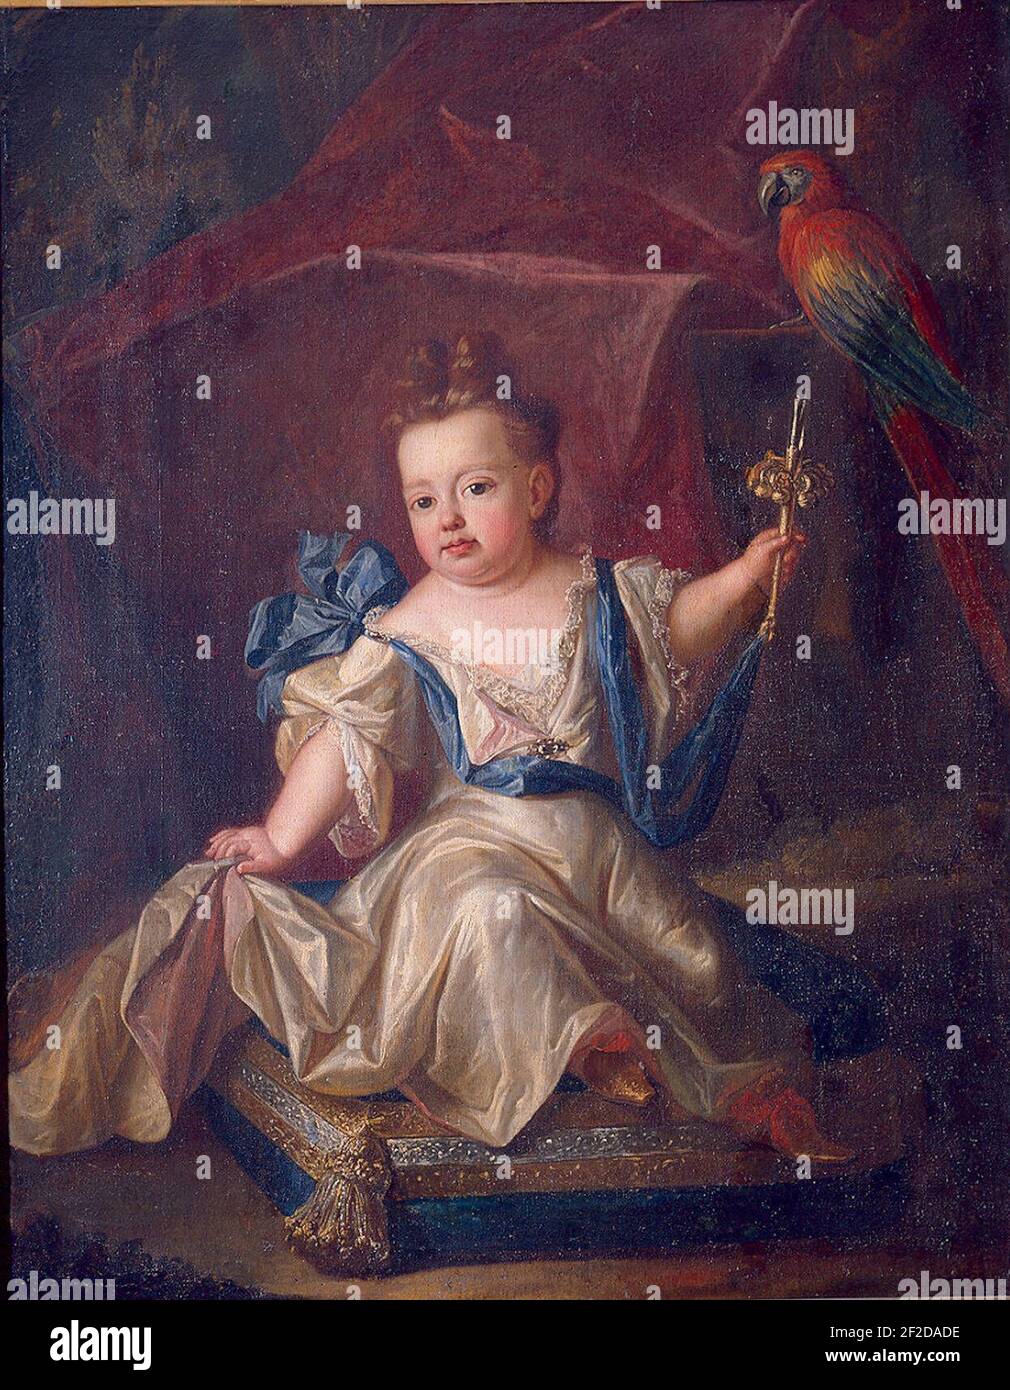 Portrait of an infant presumed to be Elisabeth Farnese by an unknown artist. Stock Photo